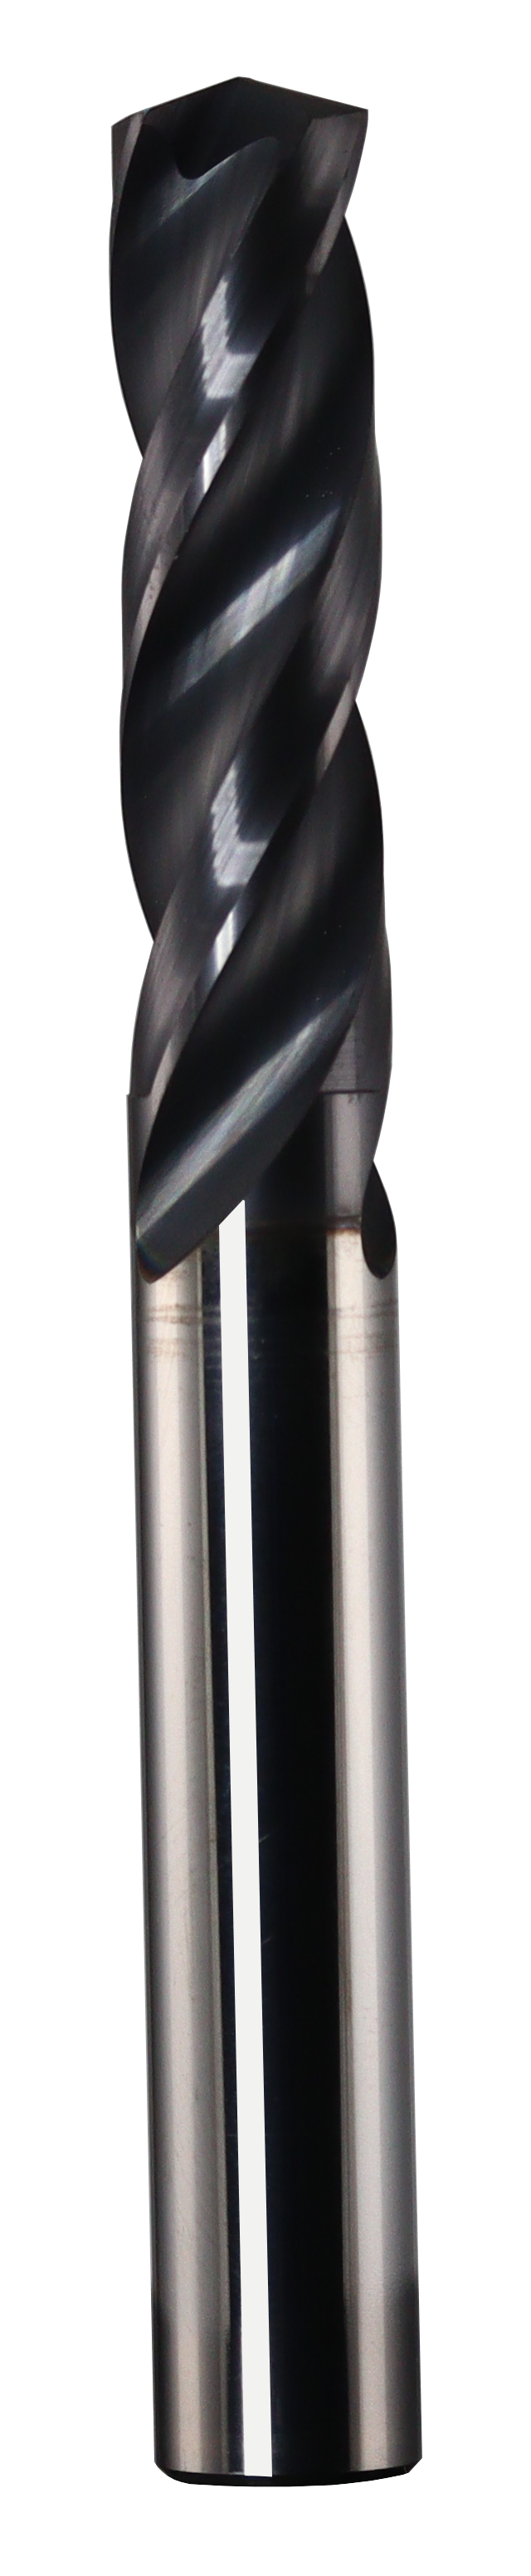 4.20mm Dia, 150 Degree Point, Solid Carbide Drill - 68977